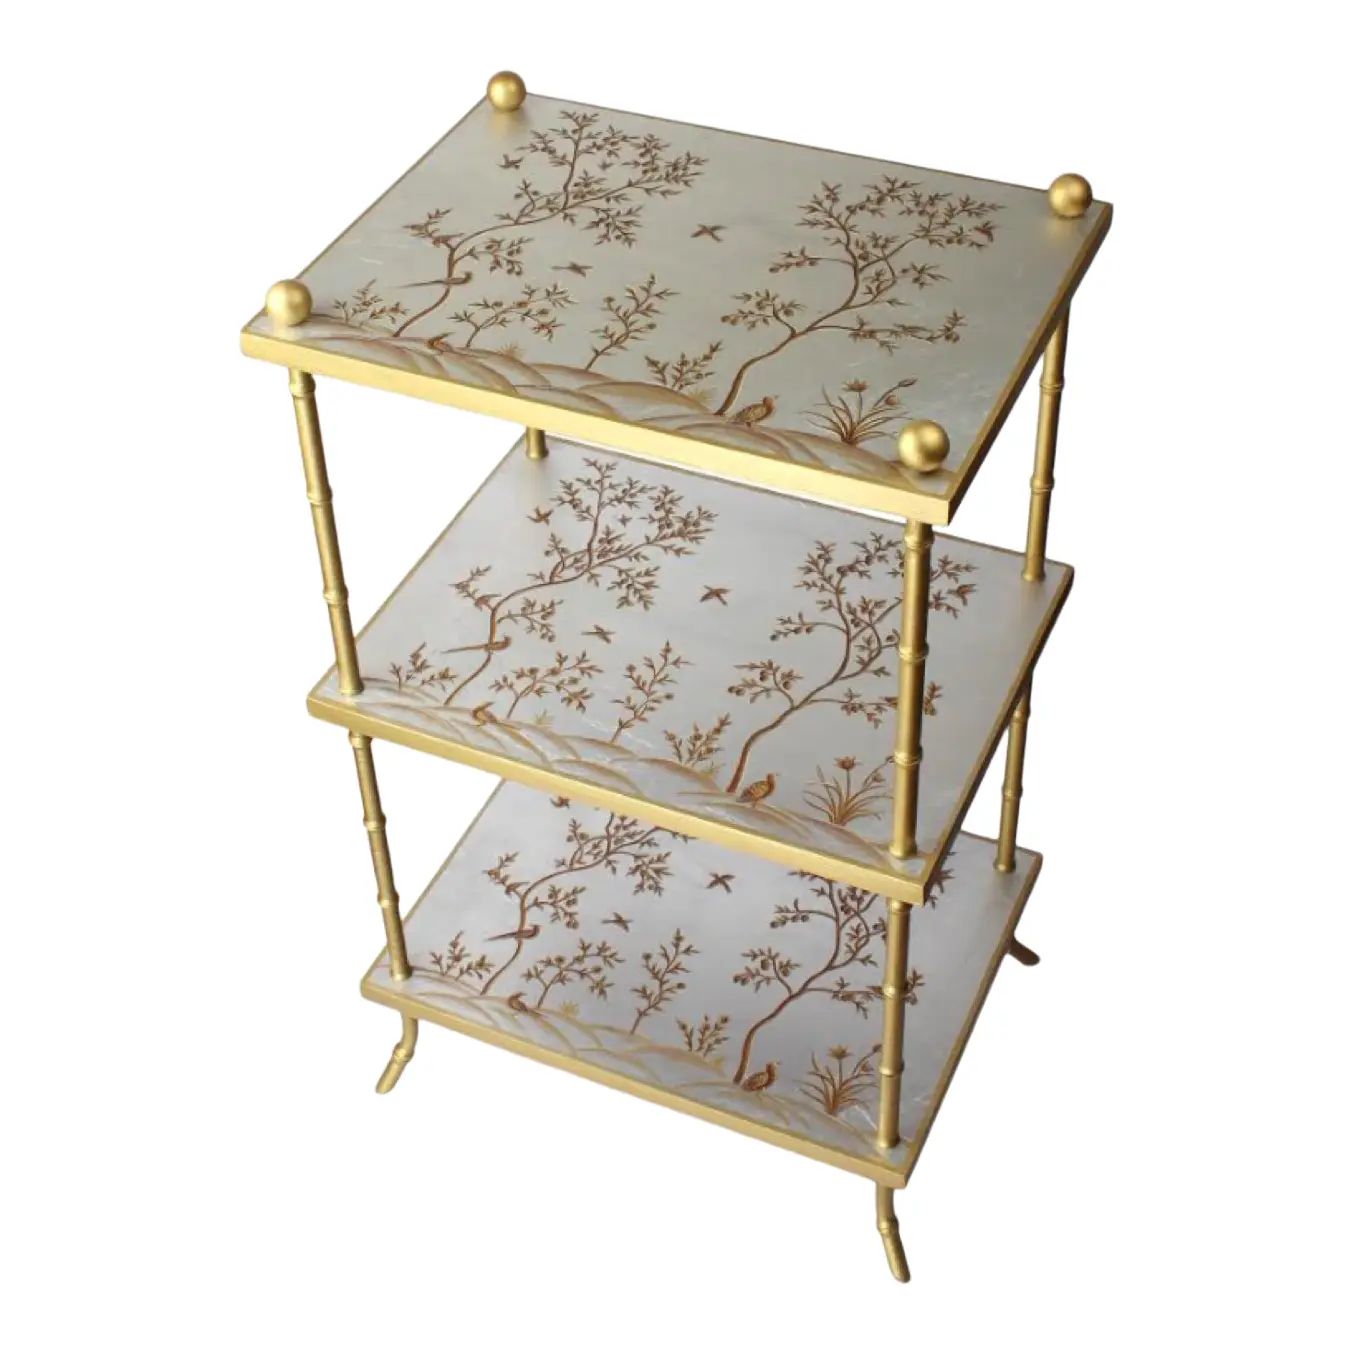 Three Tiered Table in Silver Leaf/Gold | Chairish